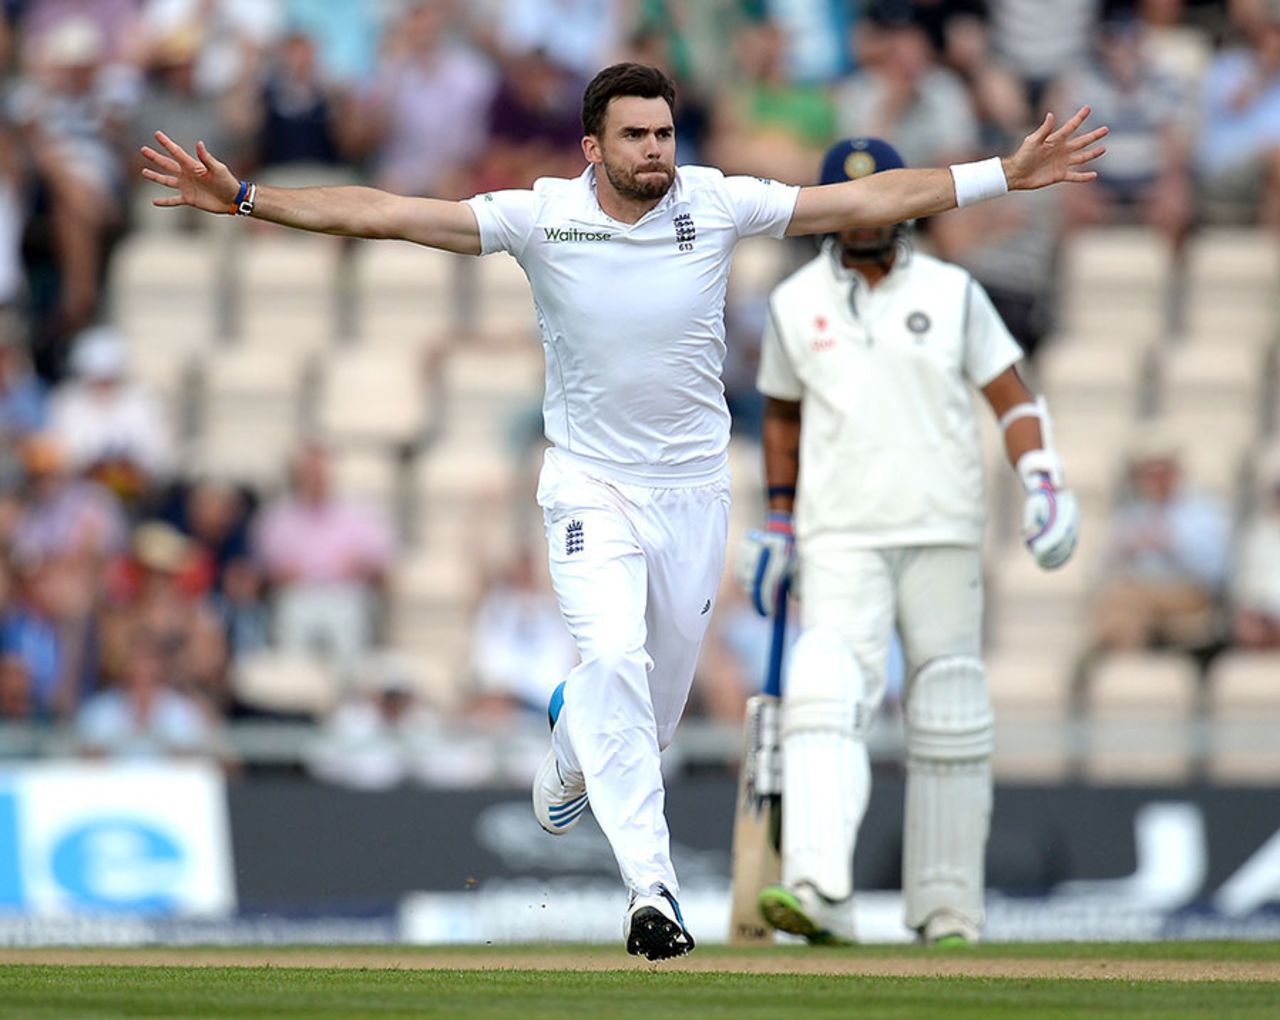 James Anderson struck an early blow for England England v India, 3rd Investec Test, Ageas Bowl, 2nd day, July 28, 2014